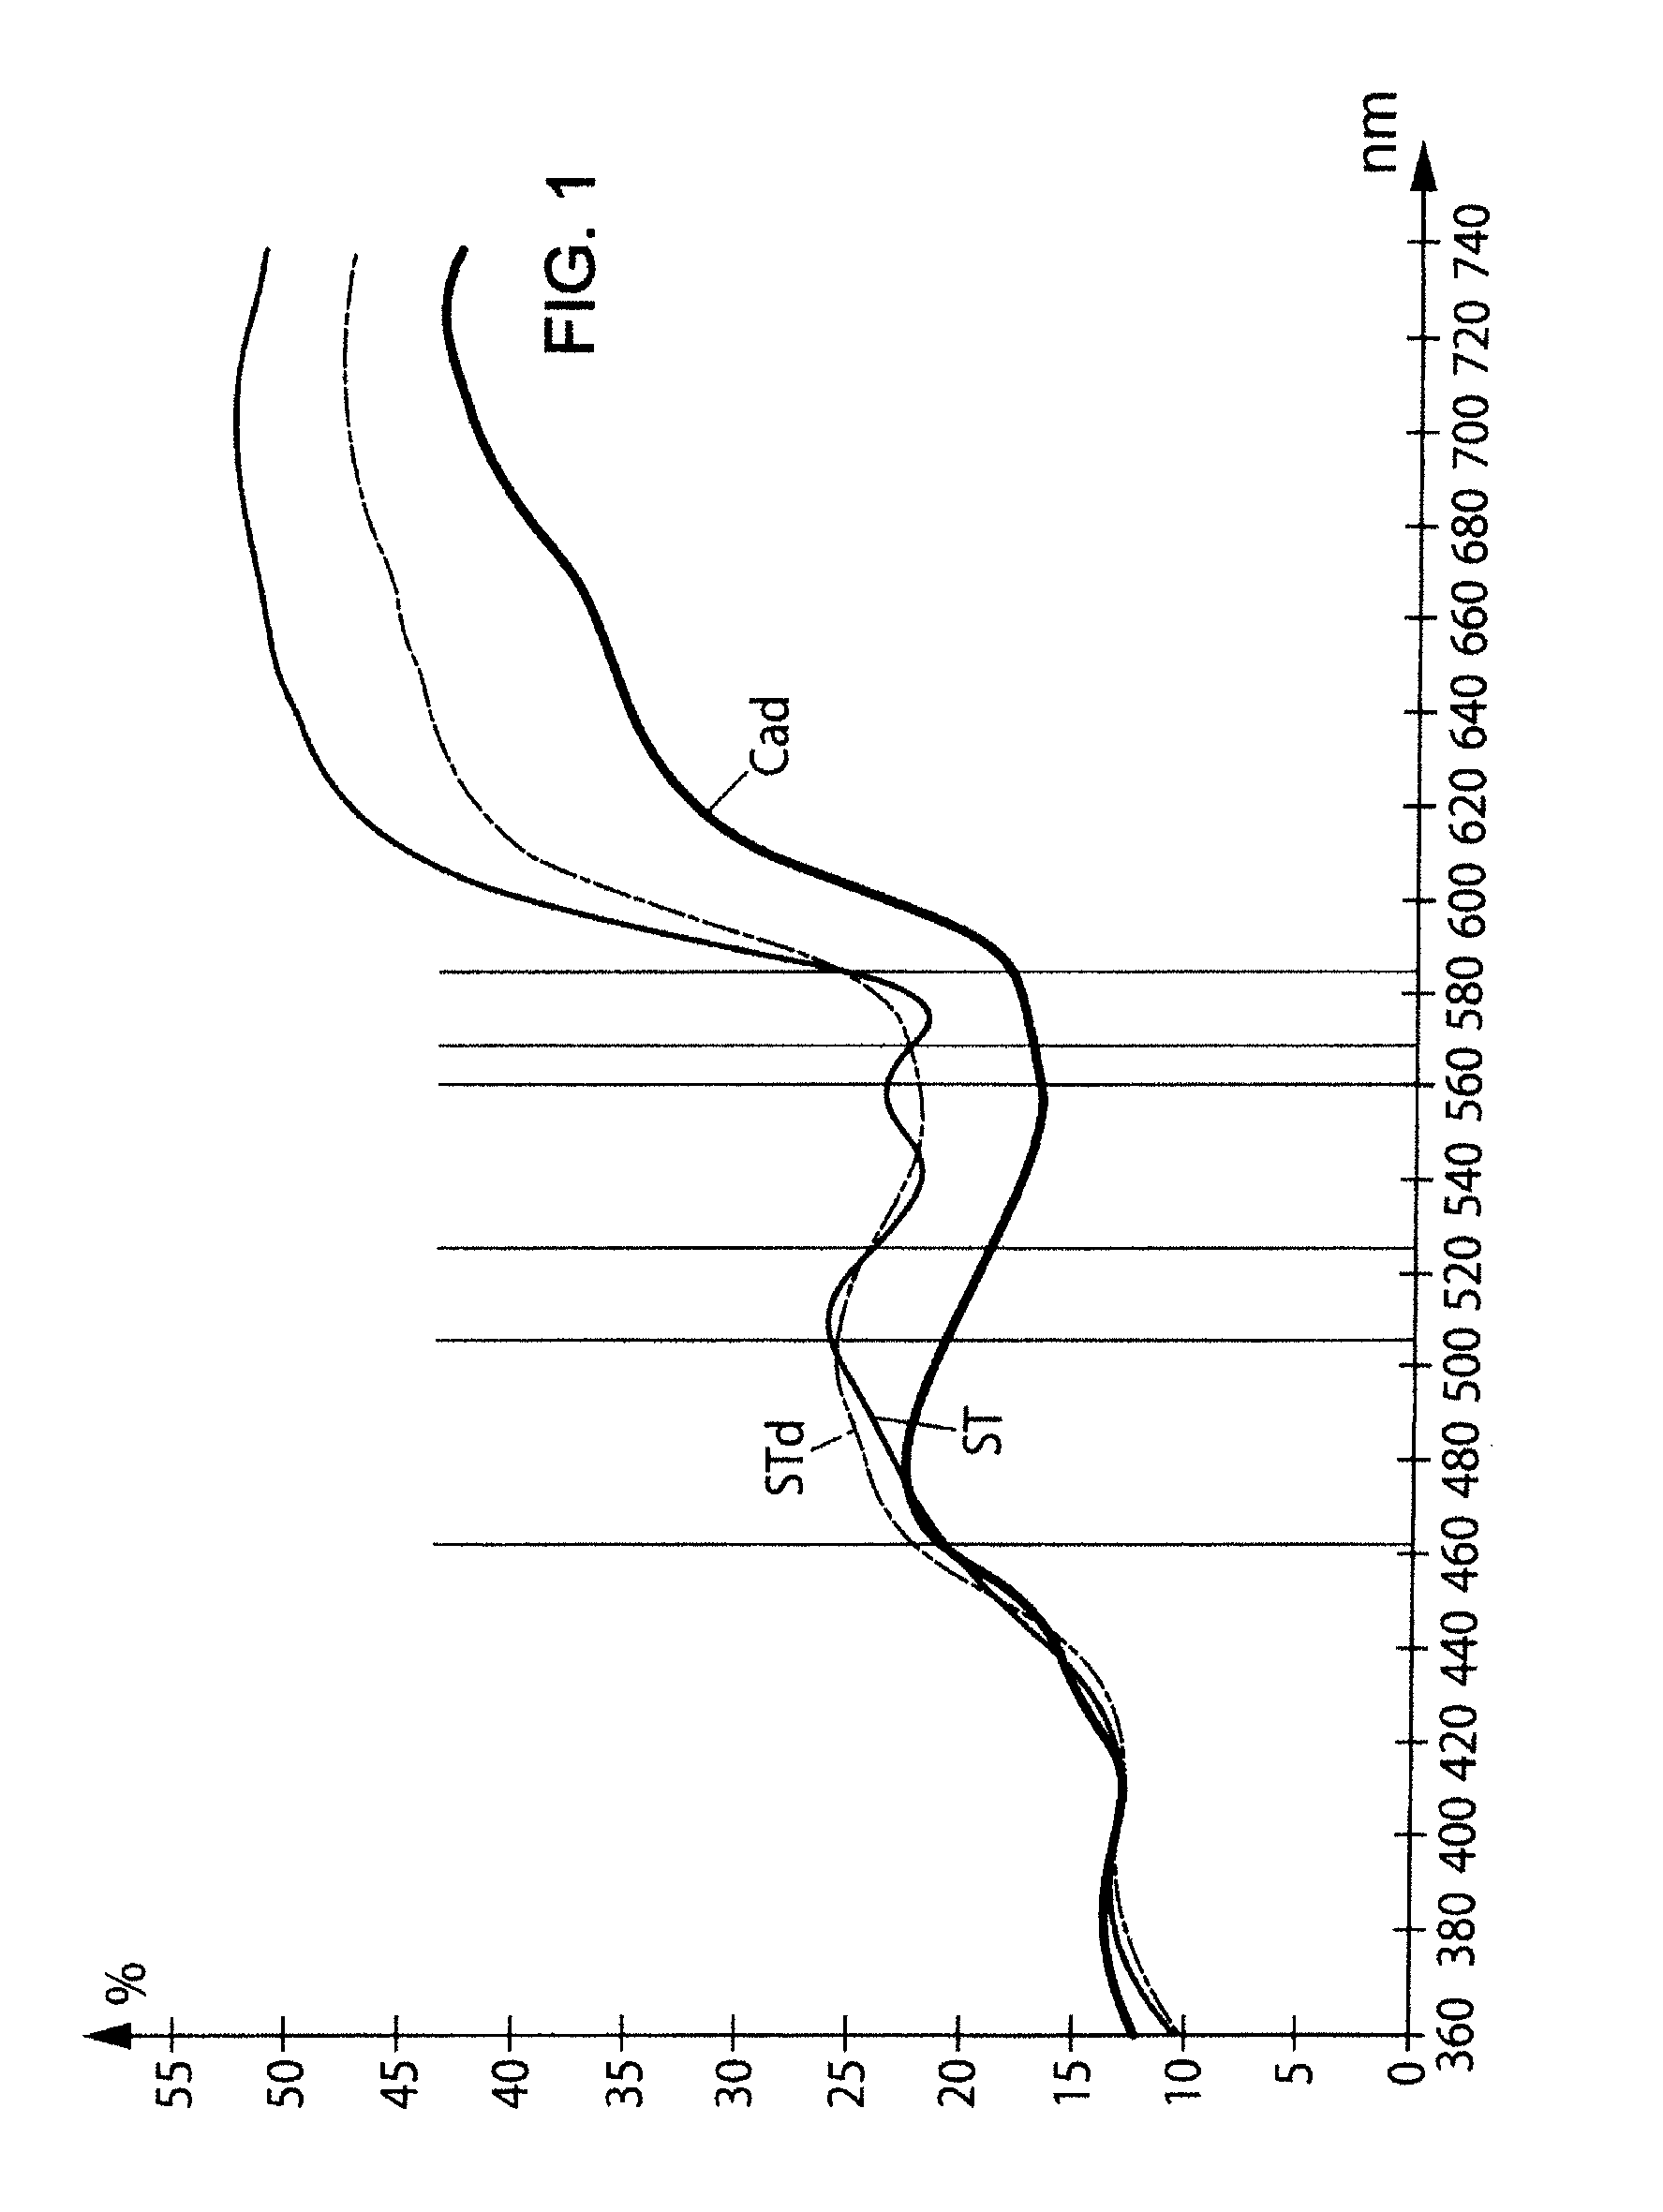 Method of validating a biometric capture, notably a body print